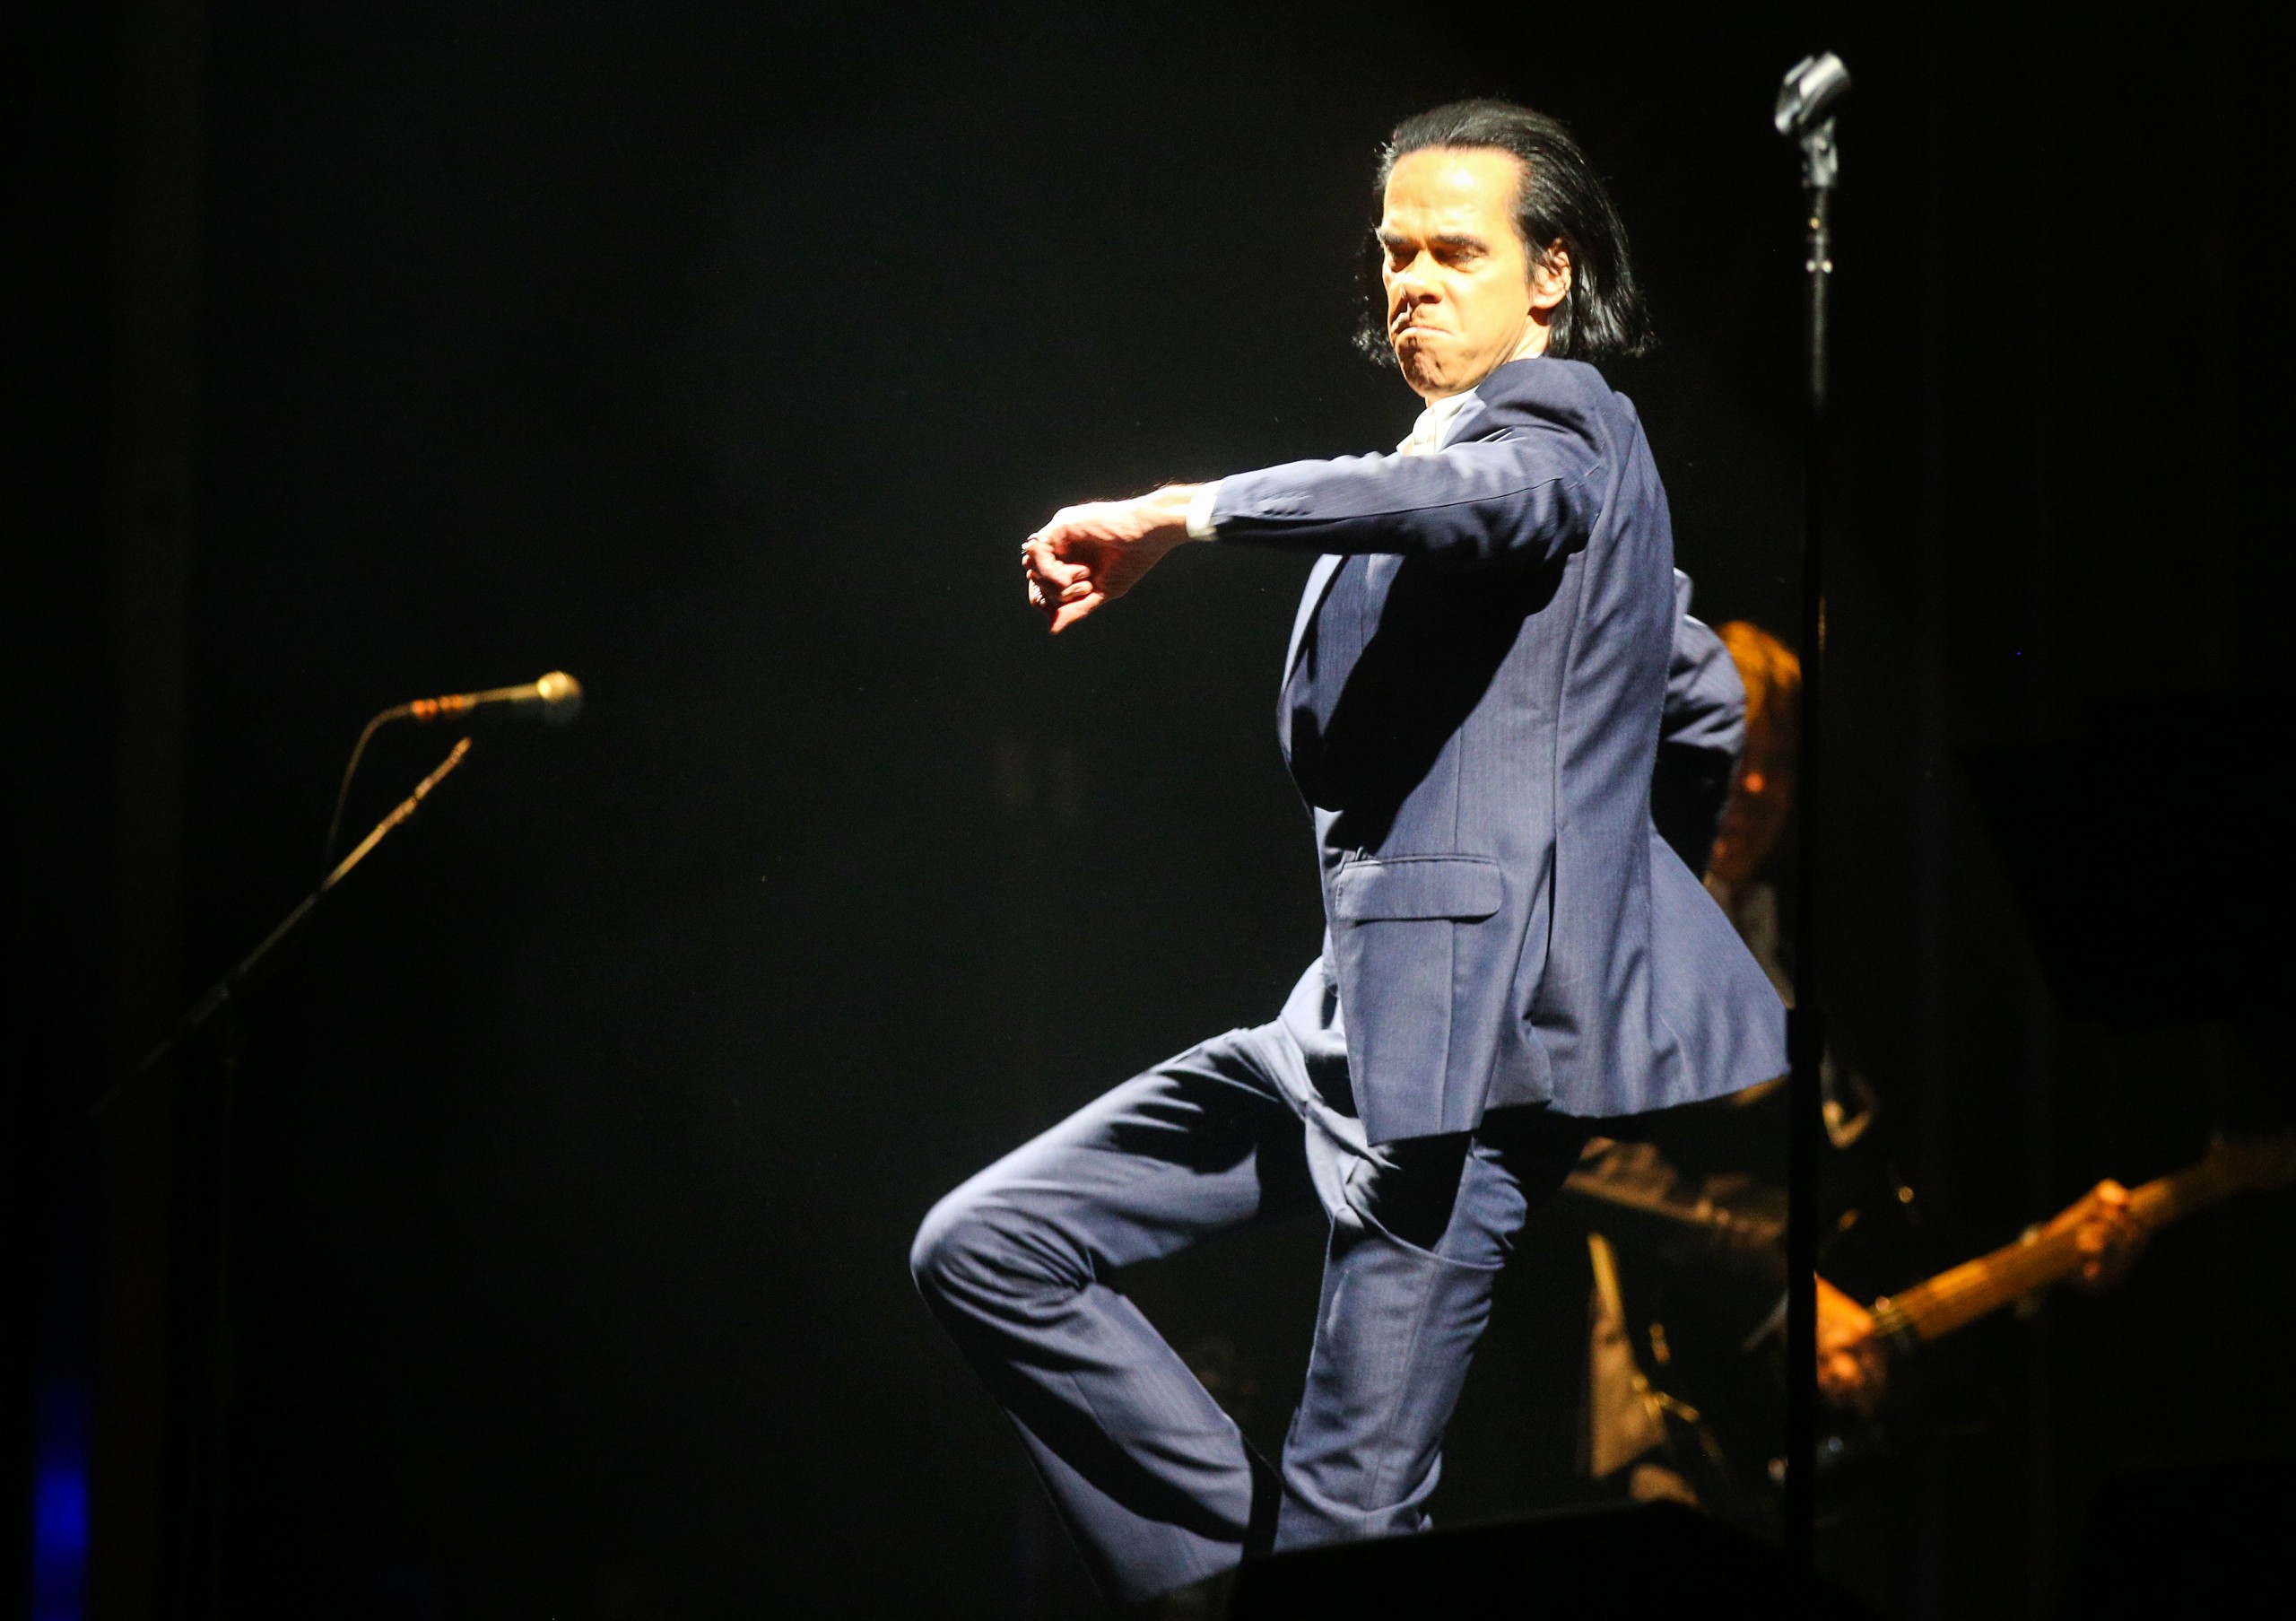 21.06.2022., Zagreb - Nick Cave and Bad Seeds na In Music festivalu Photo: